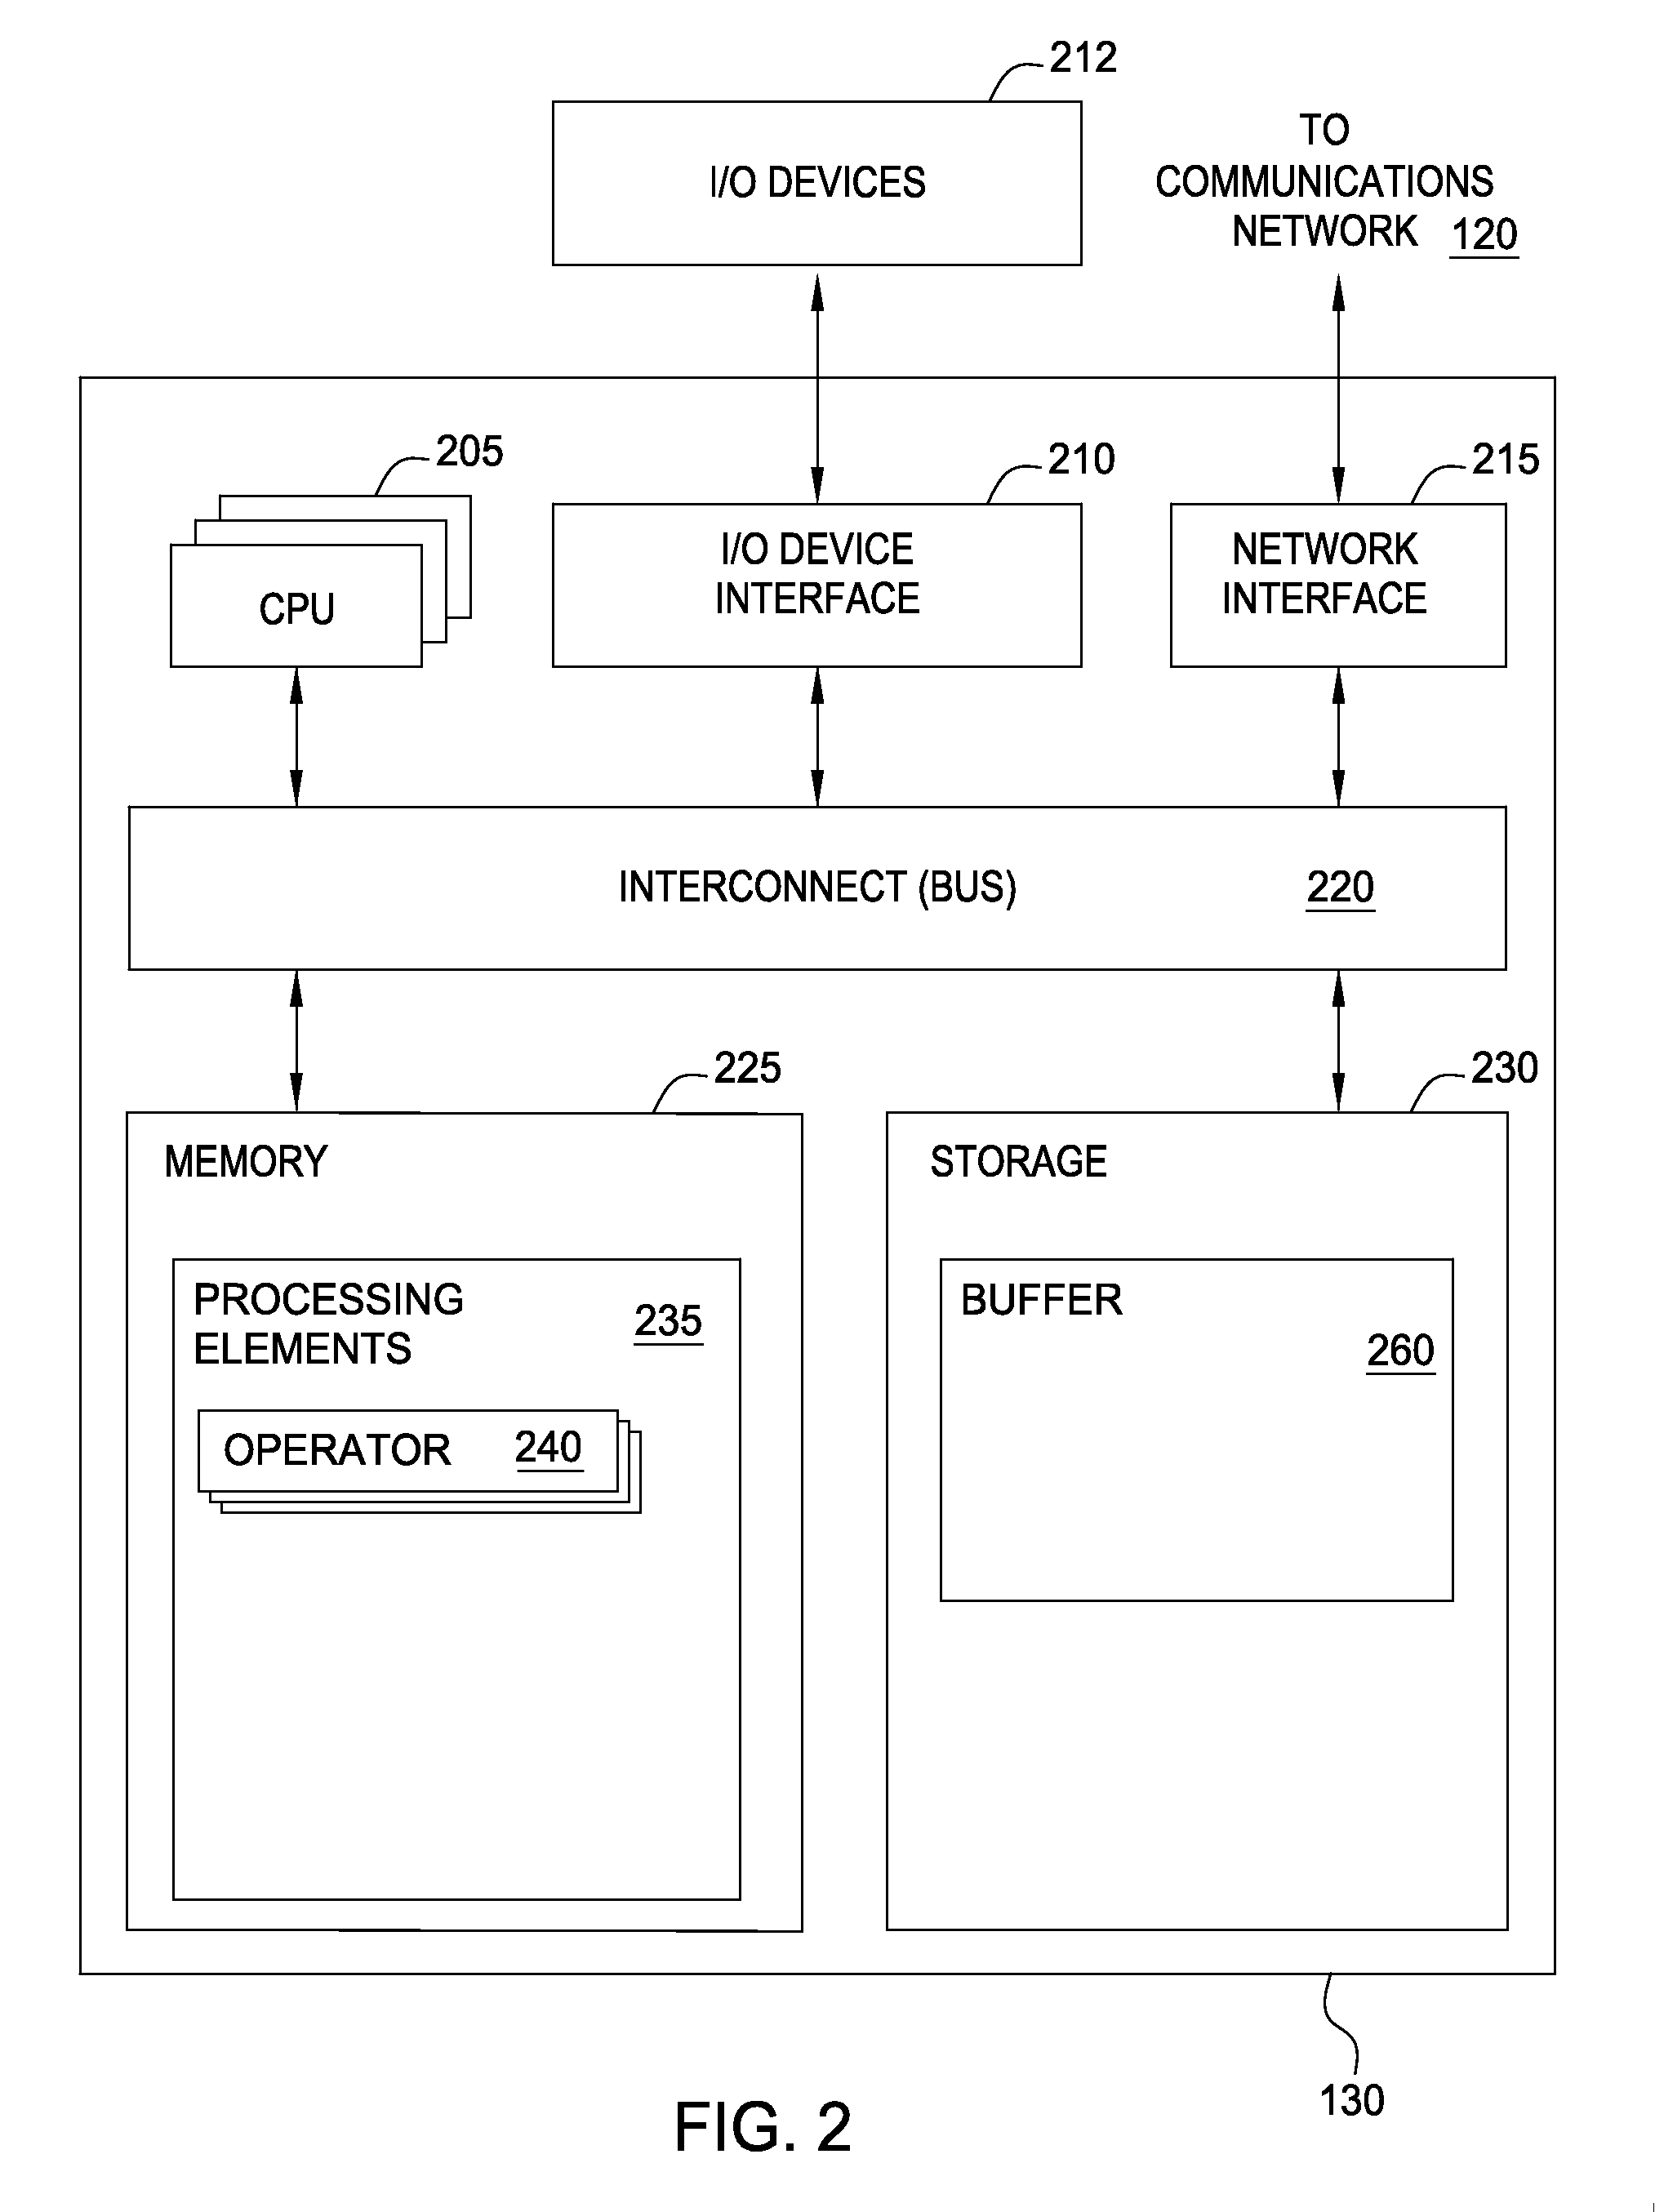 Processing element management in a streaming data system